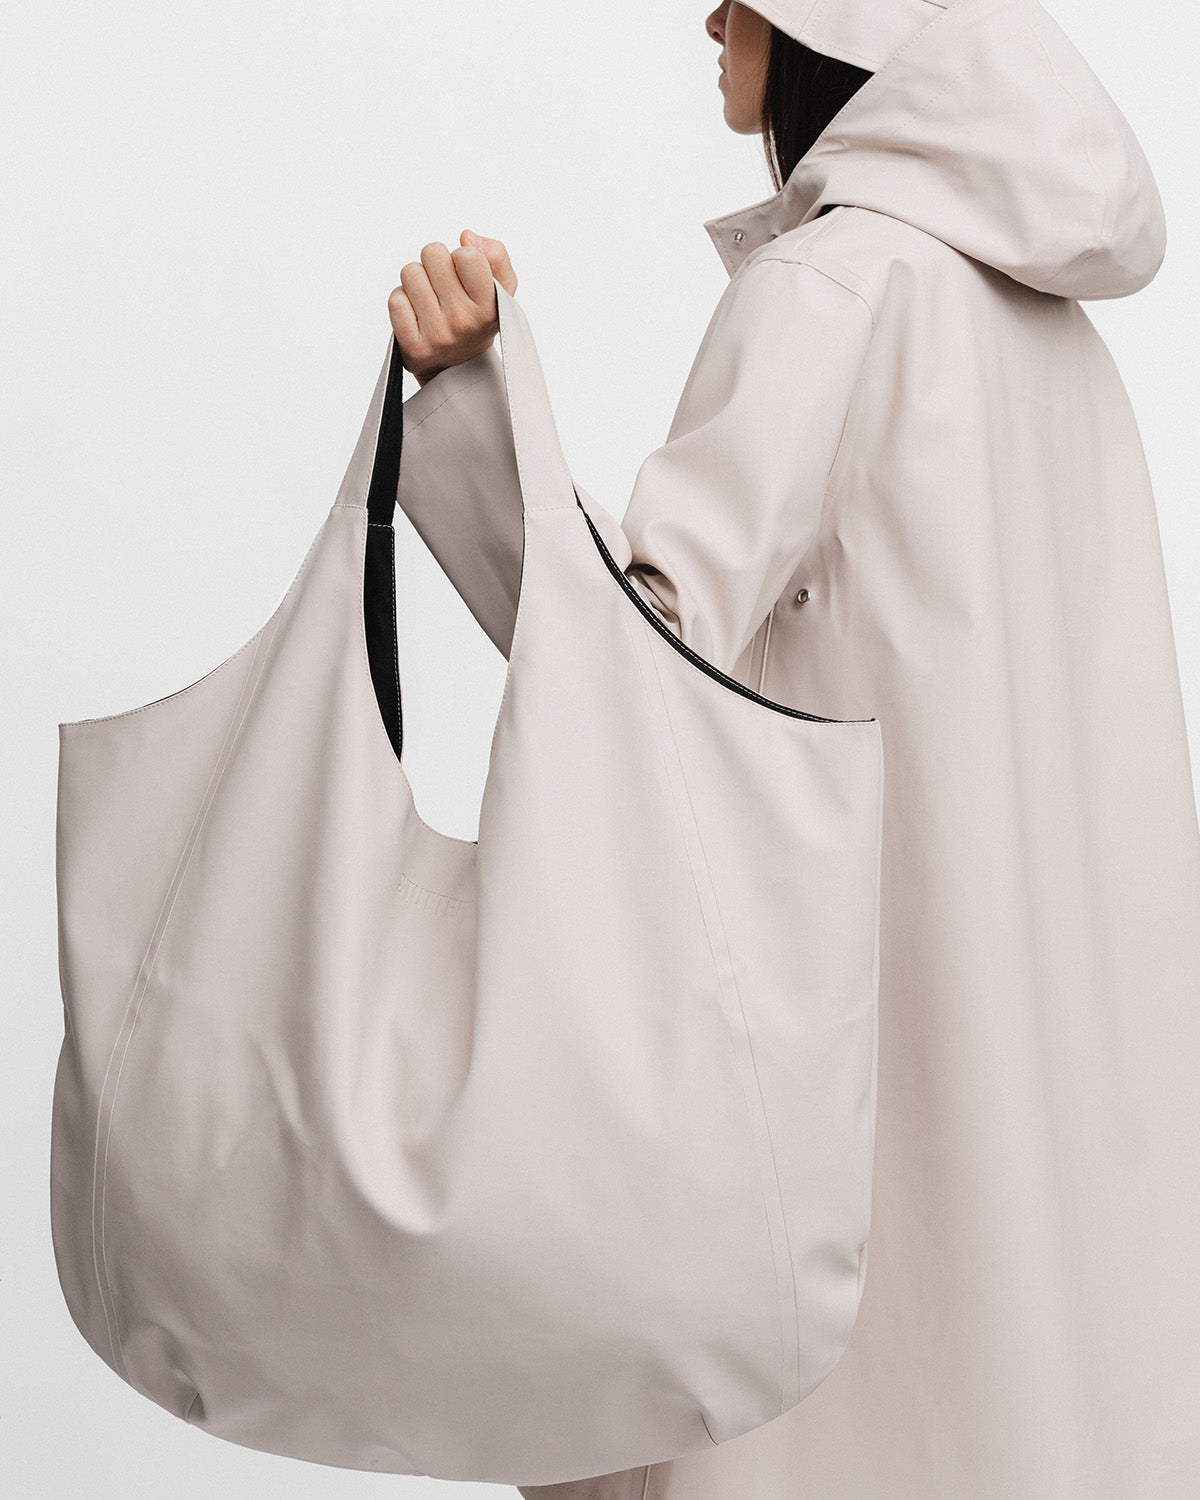 A woman with a Tote Bag in color light sand by Stutterheim